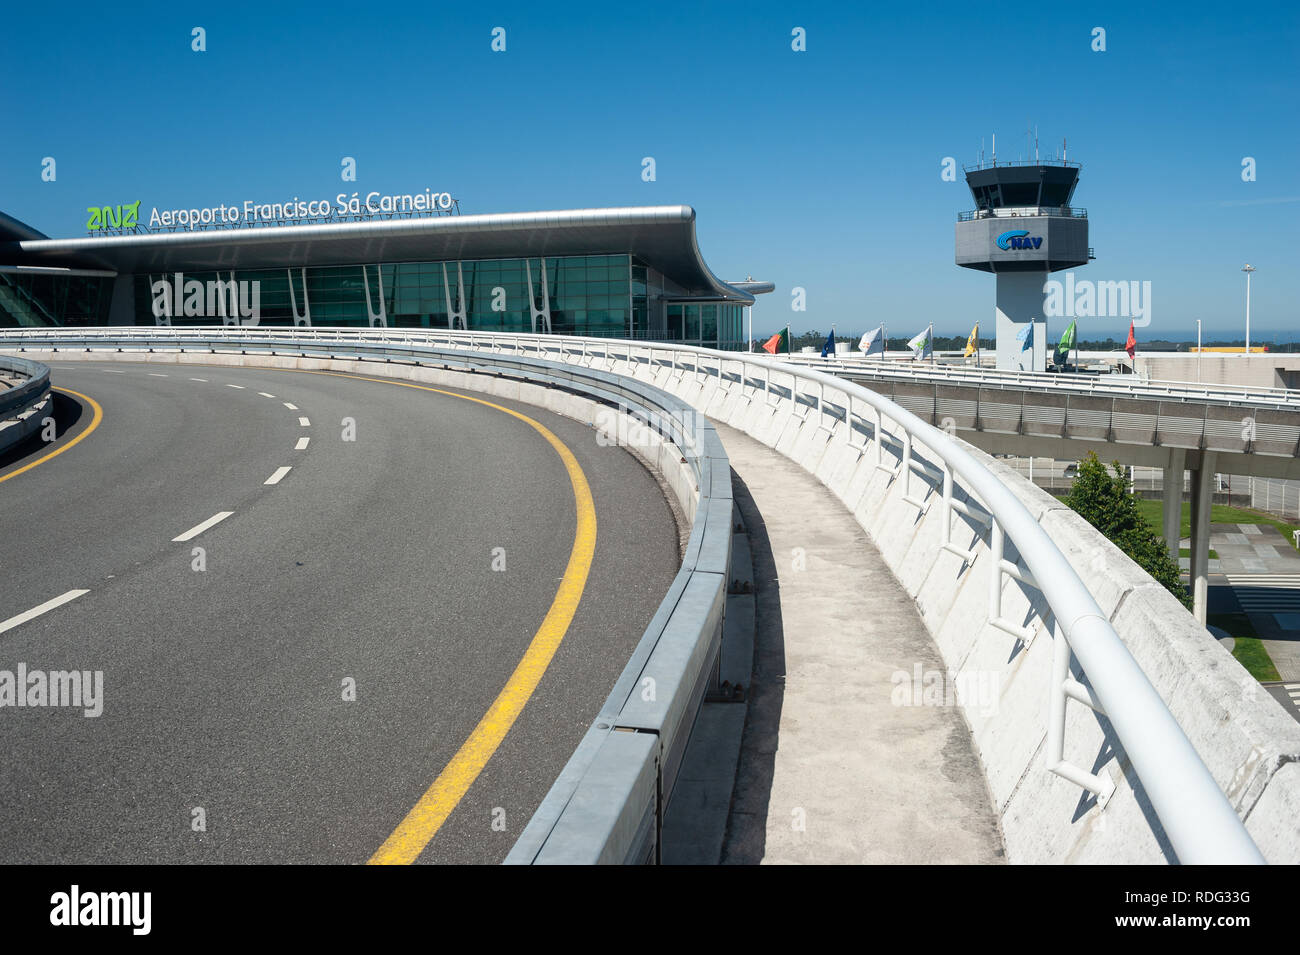 16.06.2018, Porto, Portugal, Europe - View of access road, terminal and tower at Porto's international airport Francisco Sa Carneiro. Stock Photo